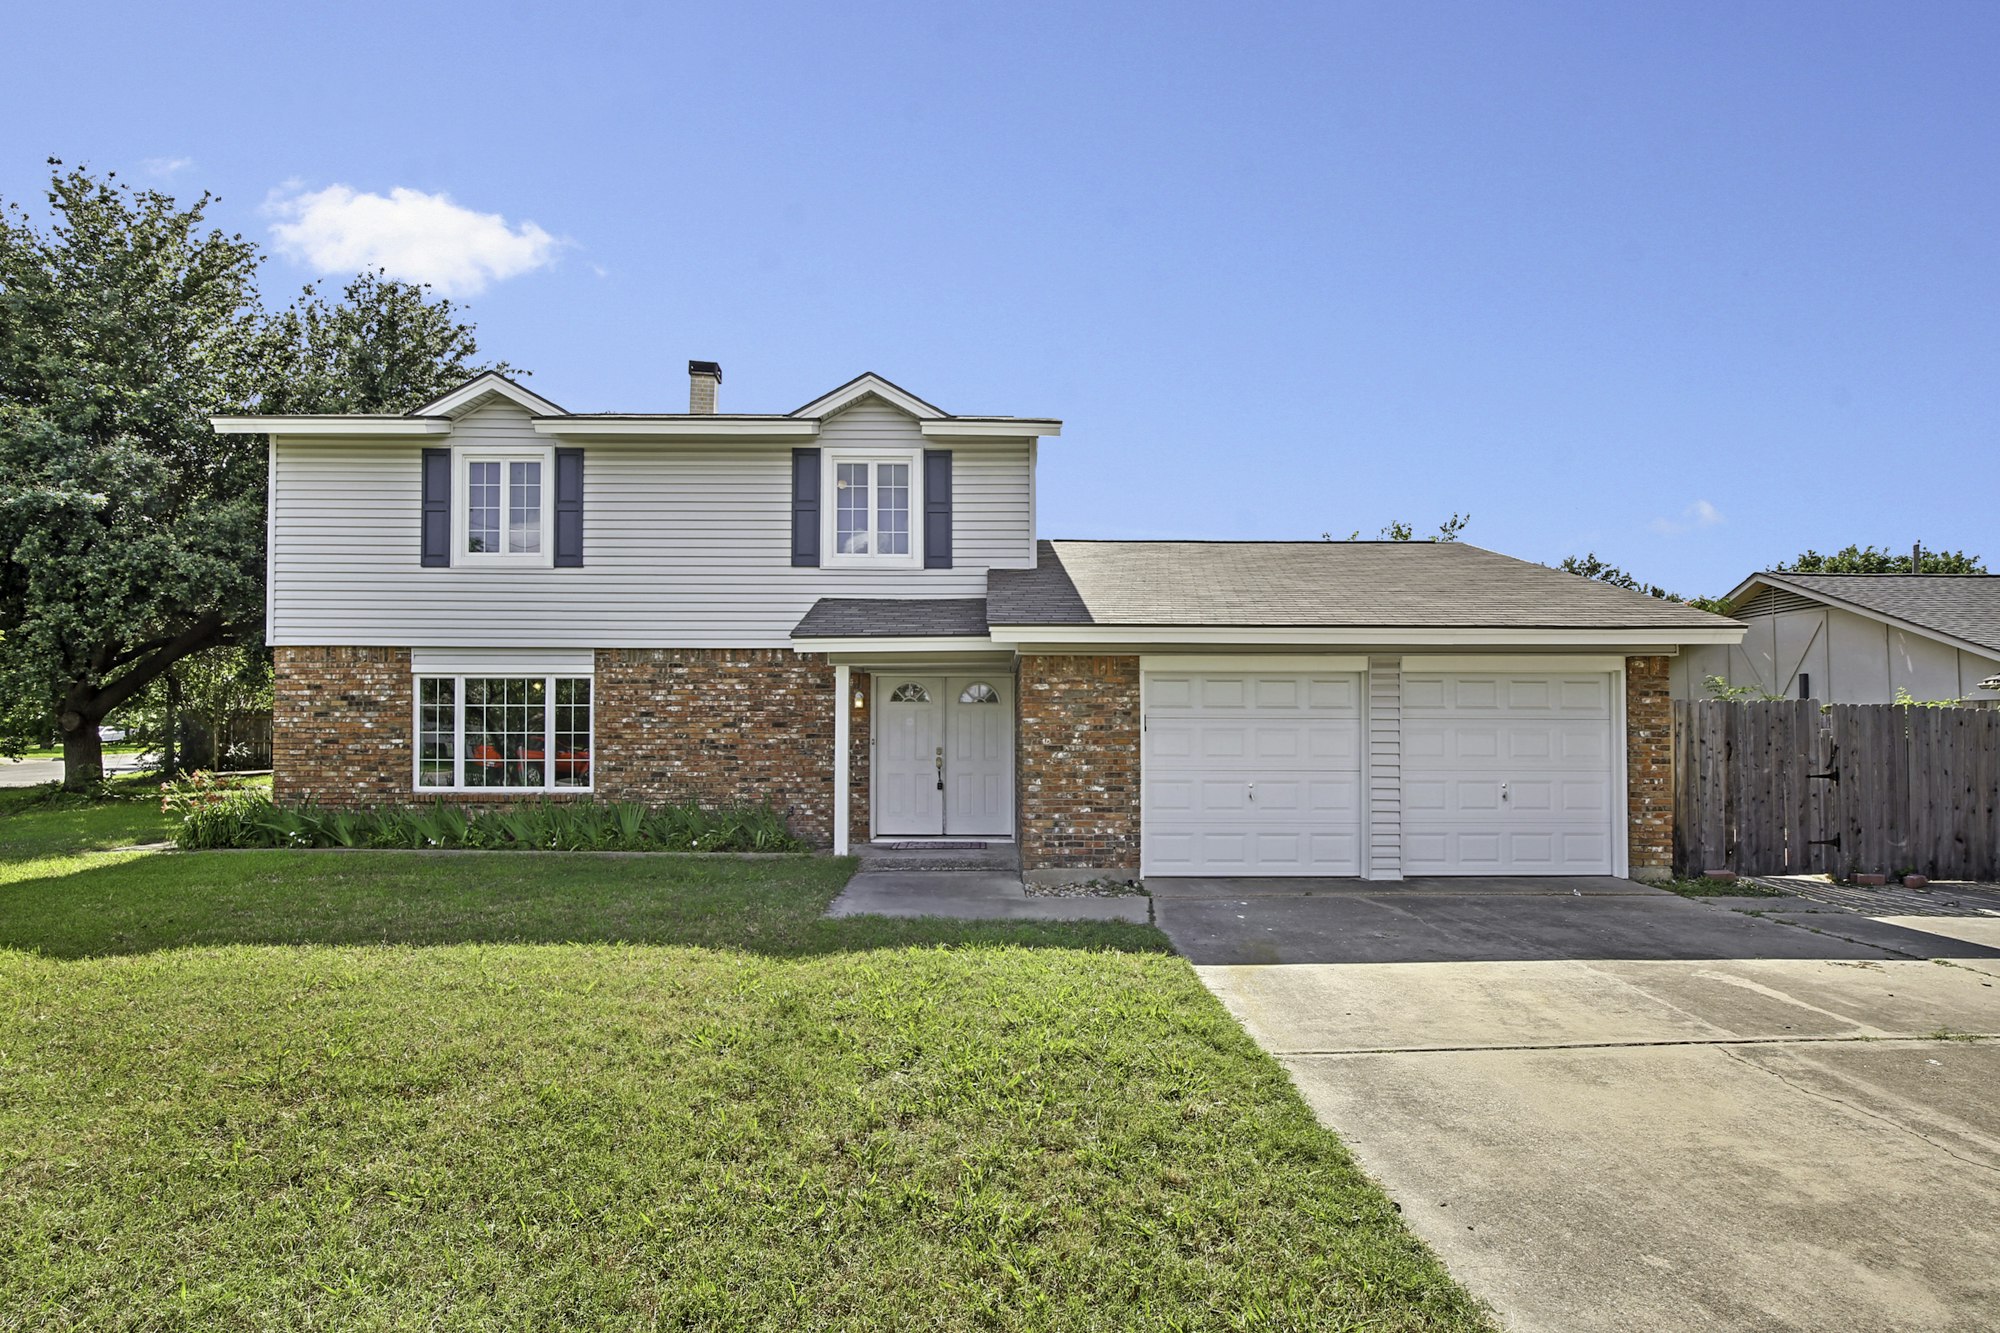 Photo 1 of 25 - 5501 Misty Meadow Dr, North Richland Hills, TX 76180